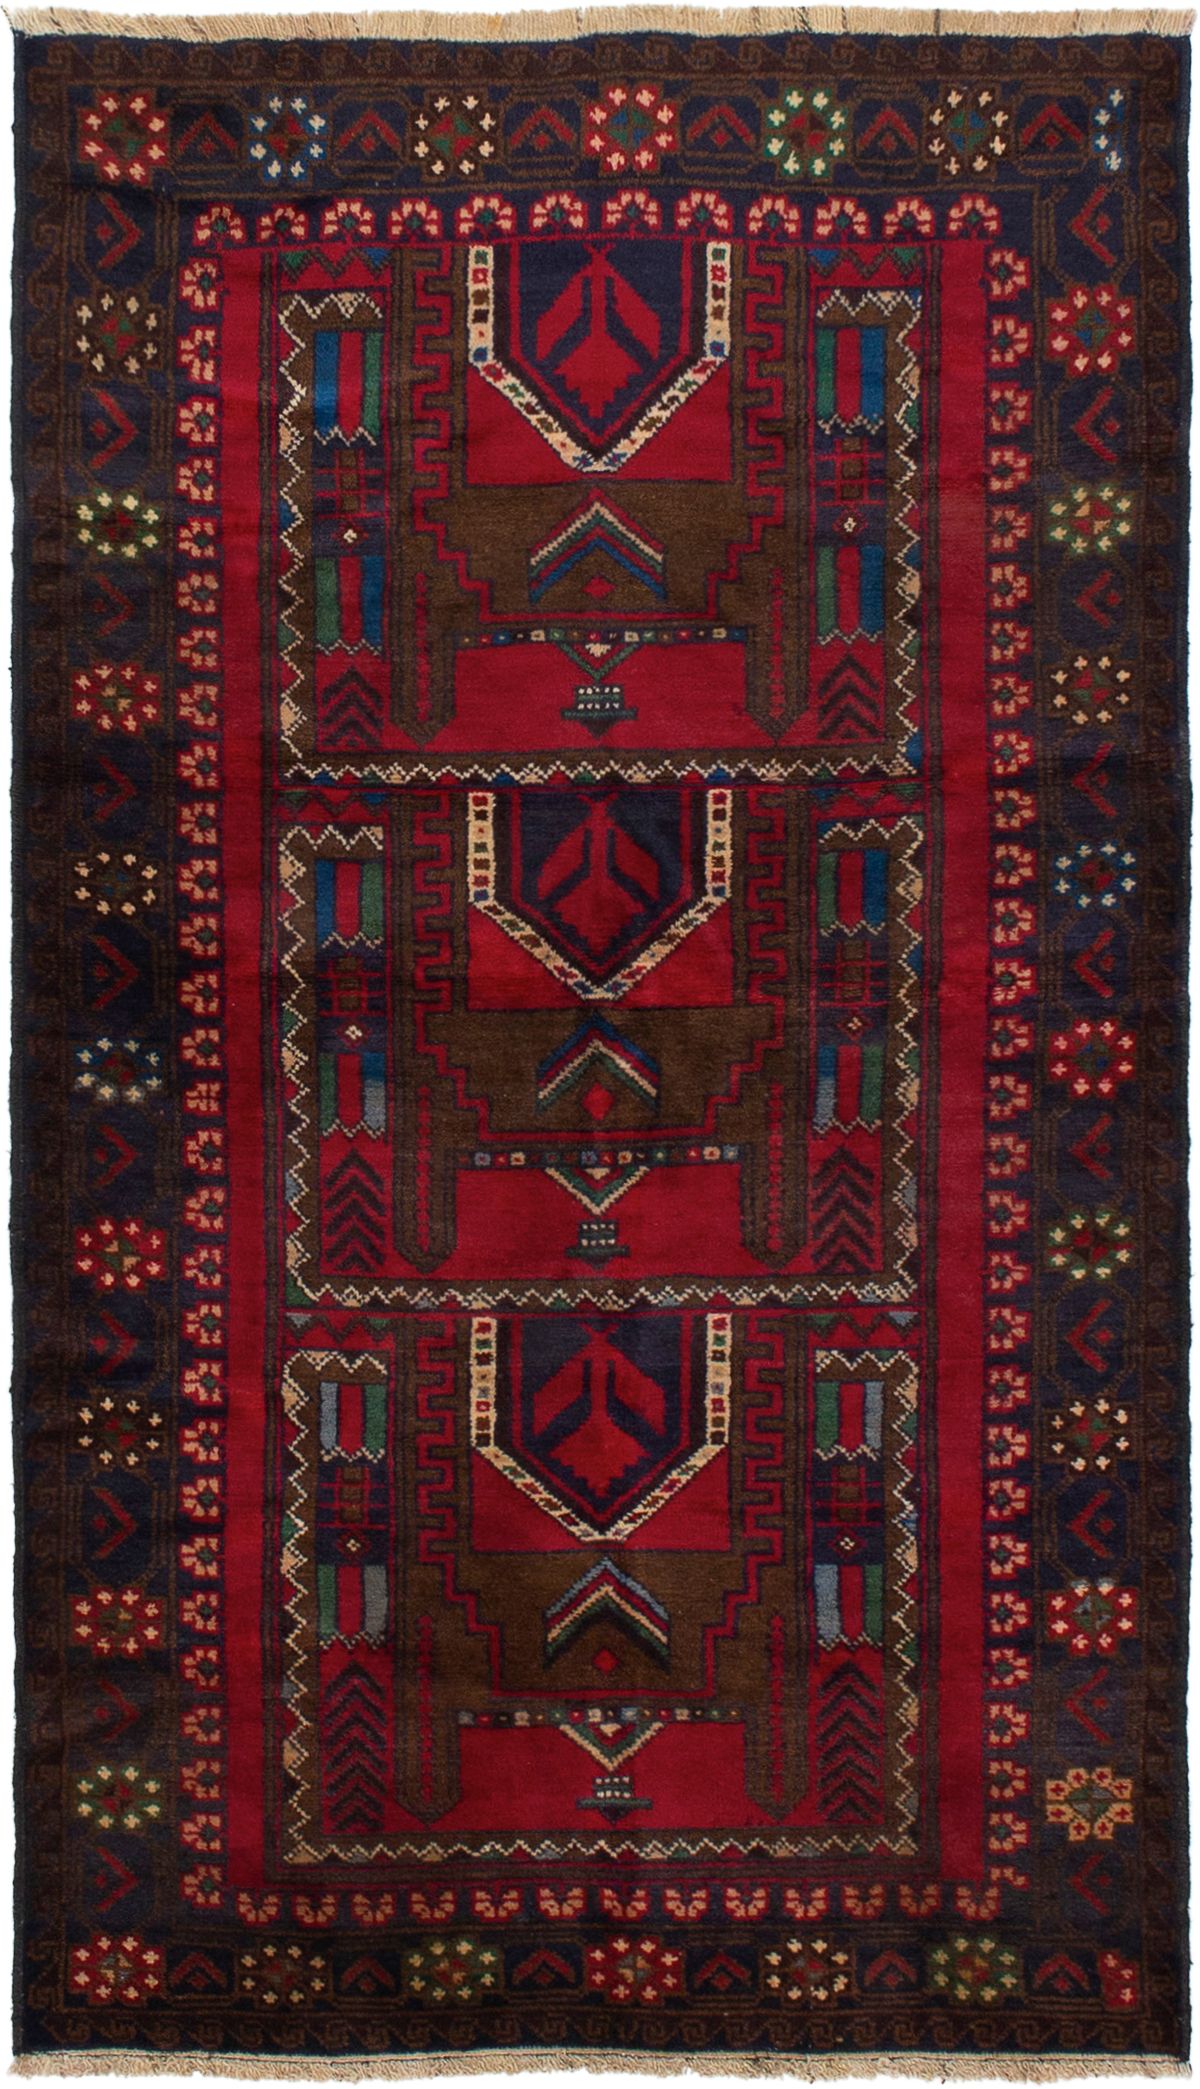 Hand-knotted Teimani Red Wool Rug 3'6" x 6'2"  Size: 3'6" x 6'2"  